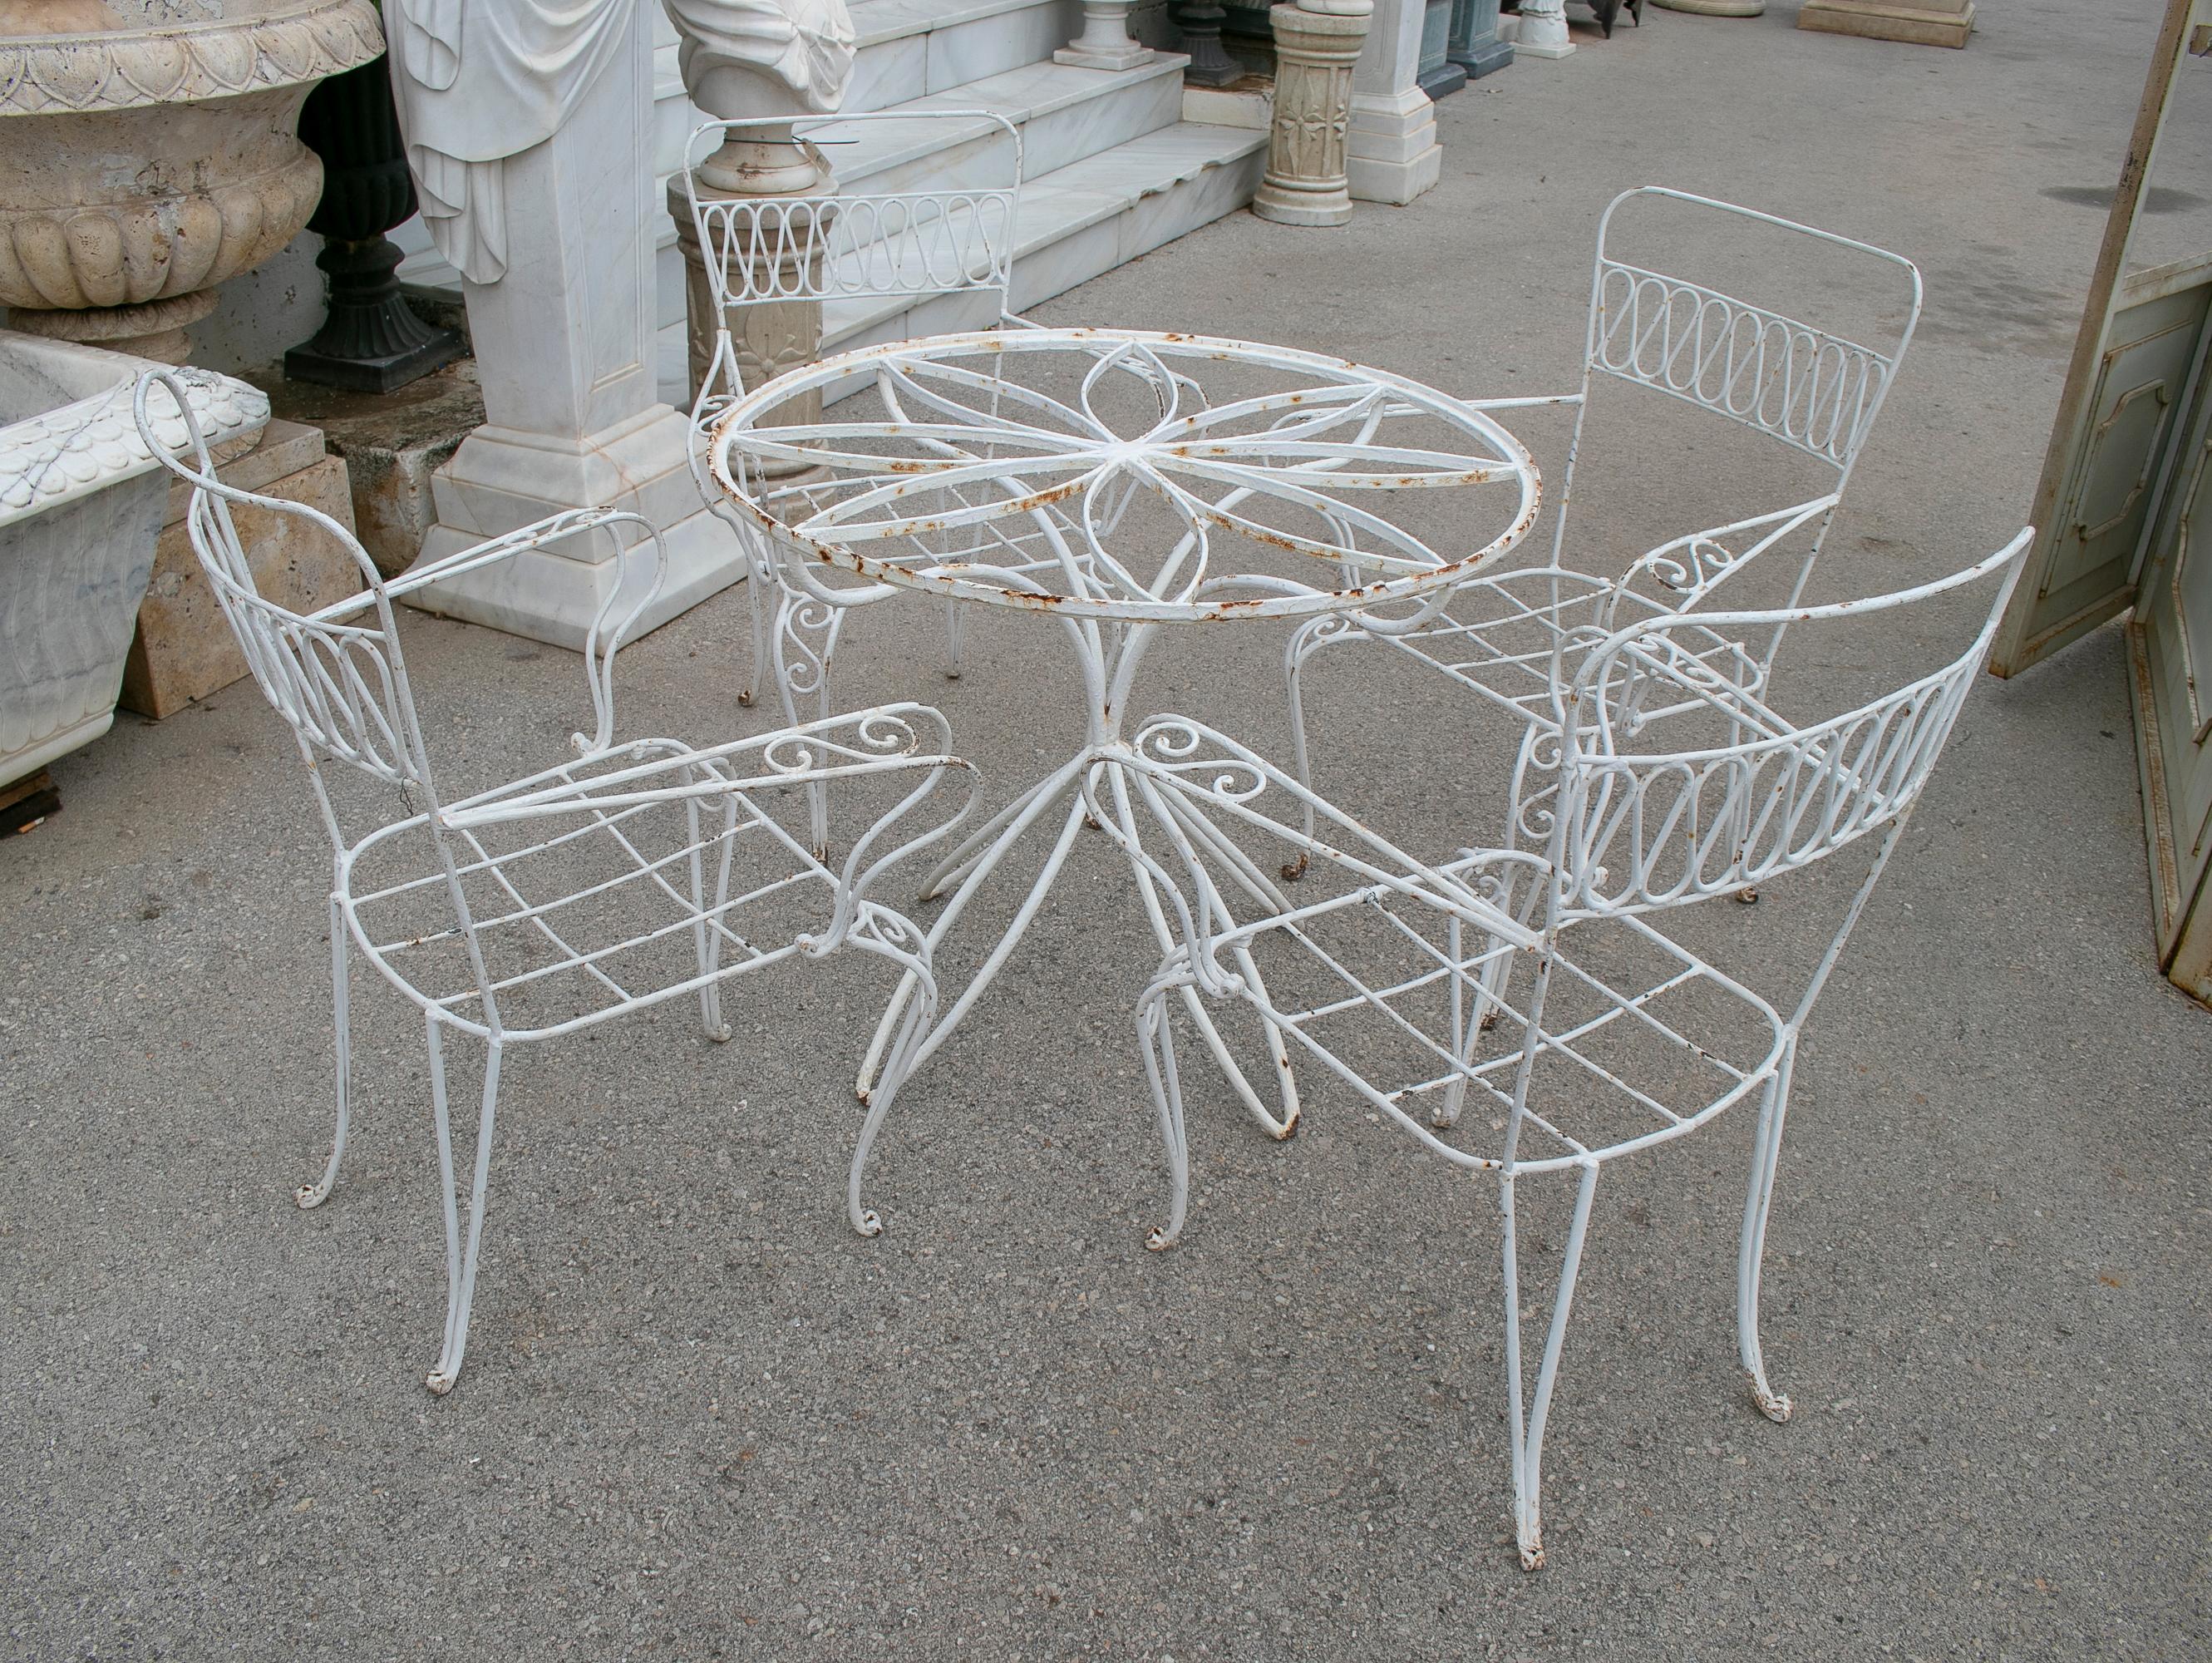 1970s garden set of an iron circular table and four chairs. 

Table measurements: 71 x 86cm
Chair measurements: 88 x 69 x 56cm.